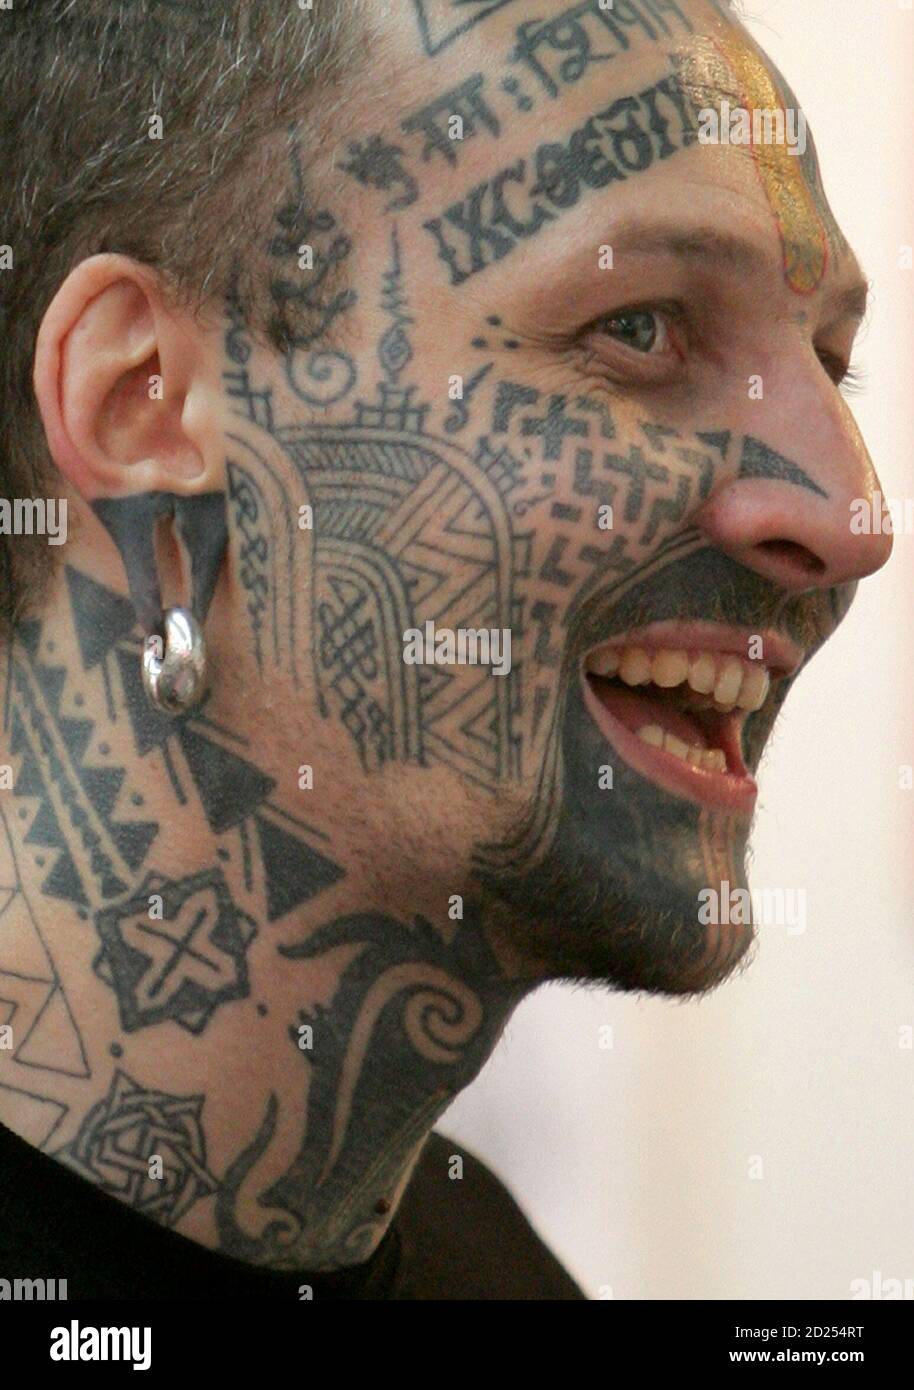 Tattoos On Your Face